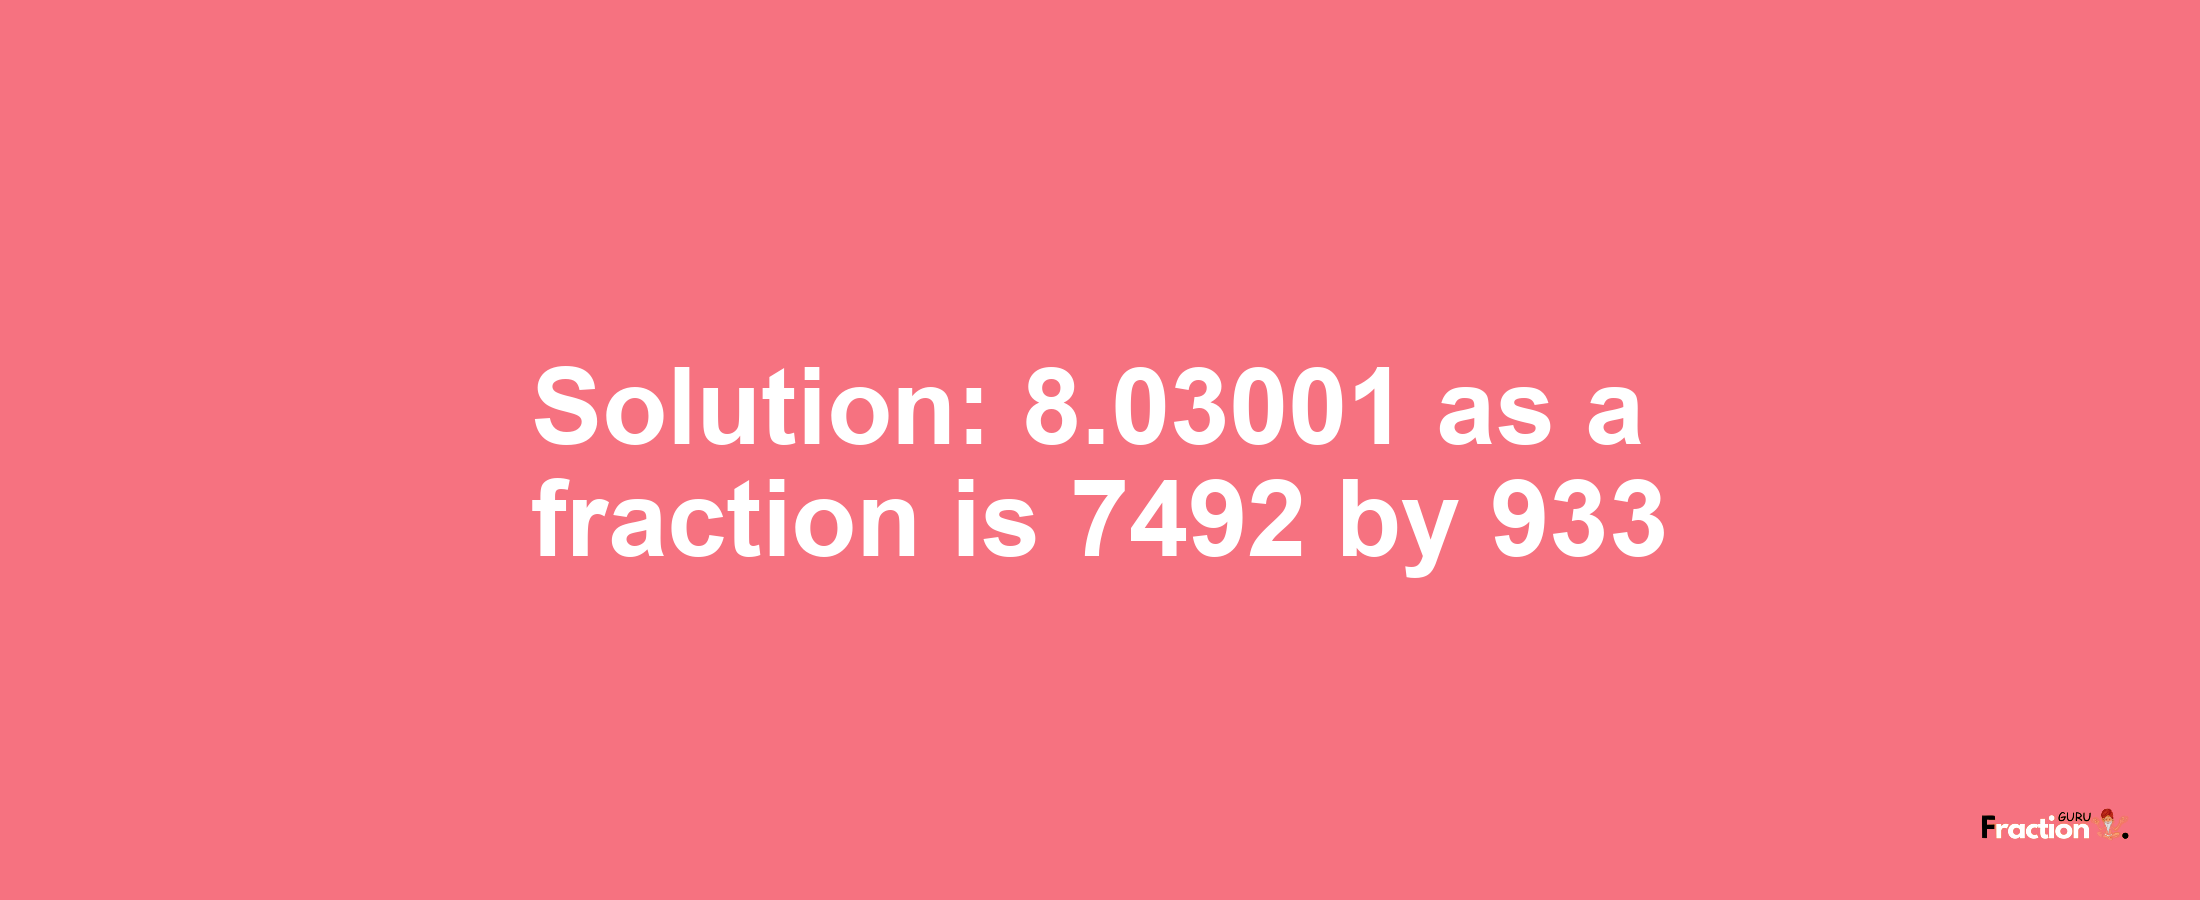 Solution:8.03001 as a fraction is 7492/933